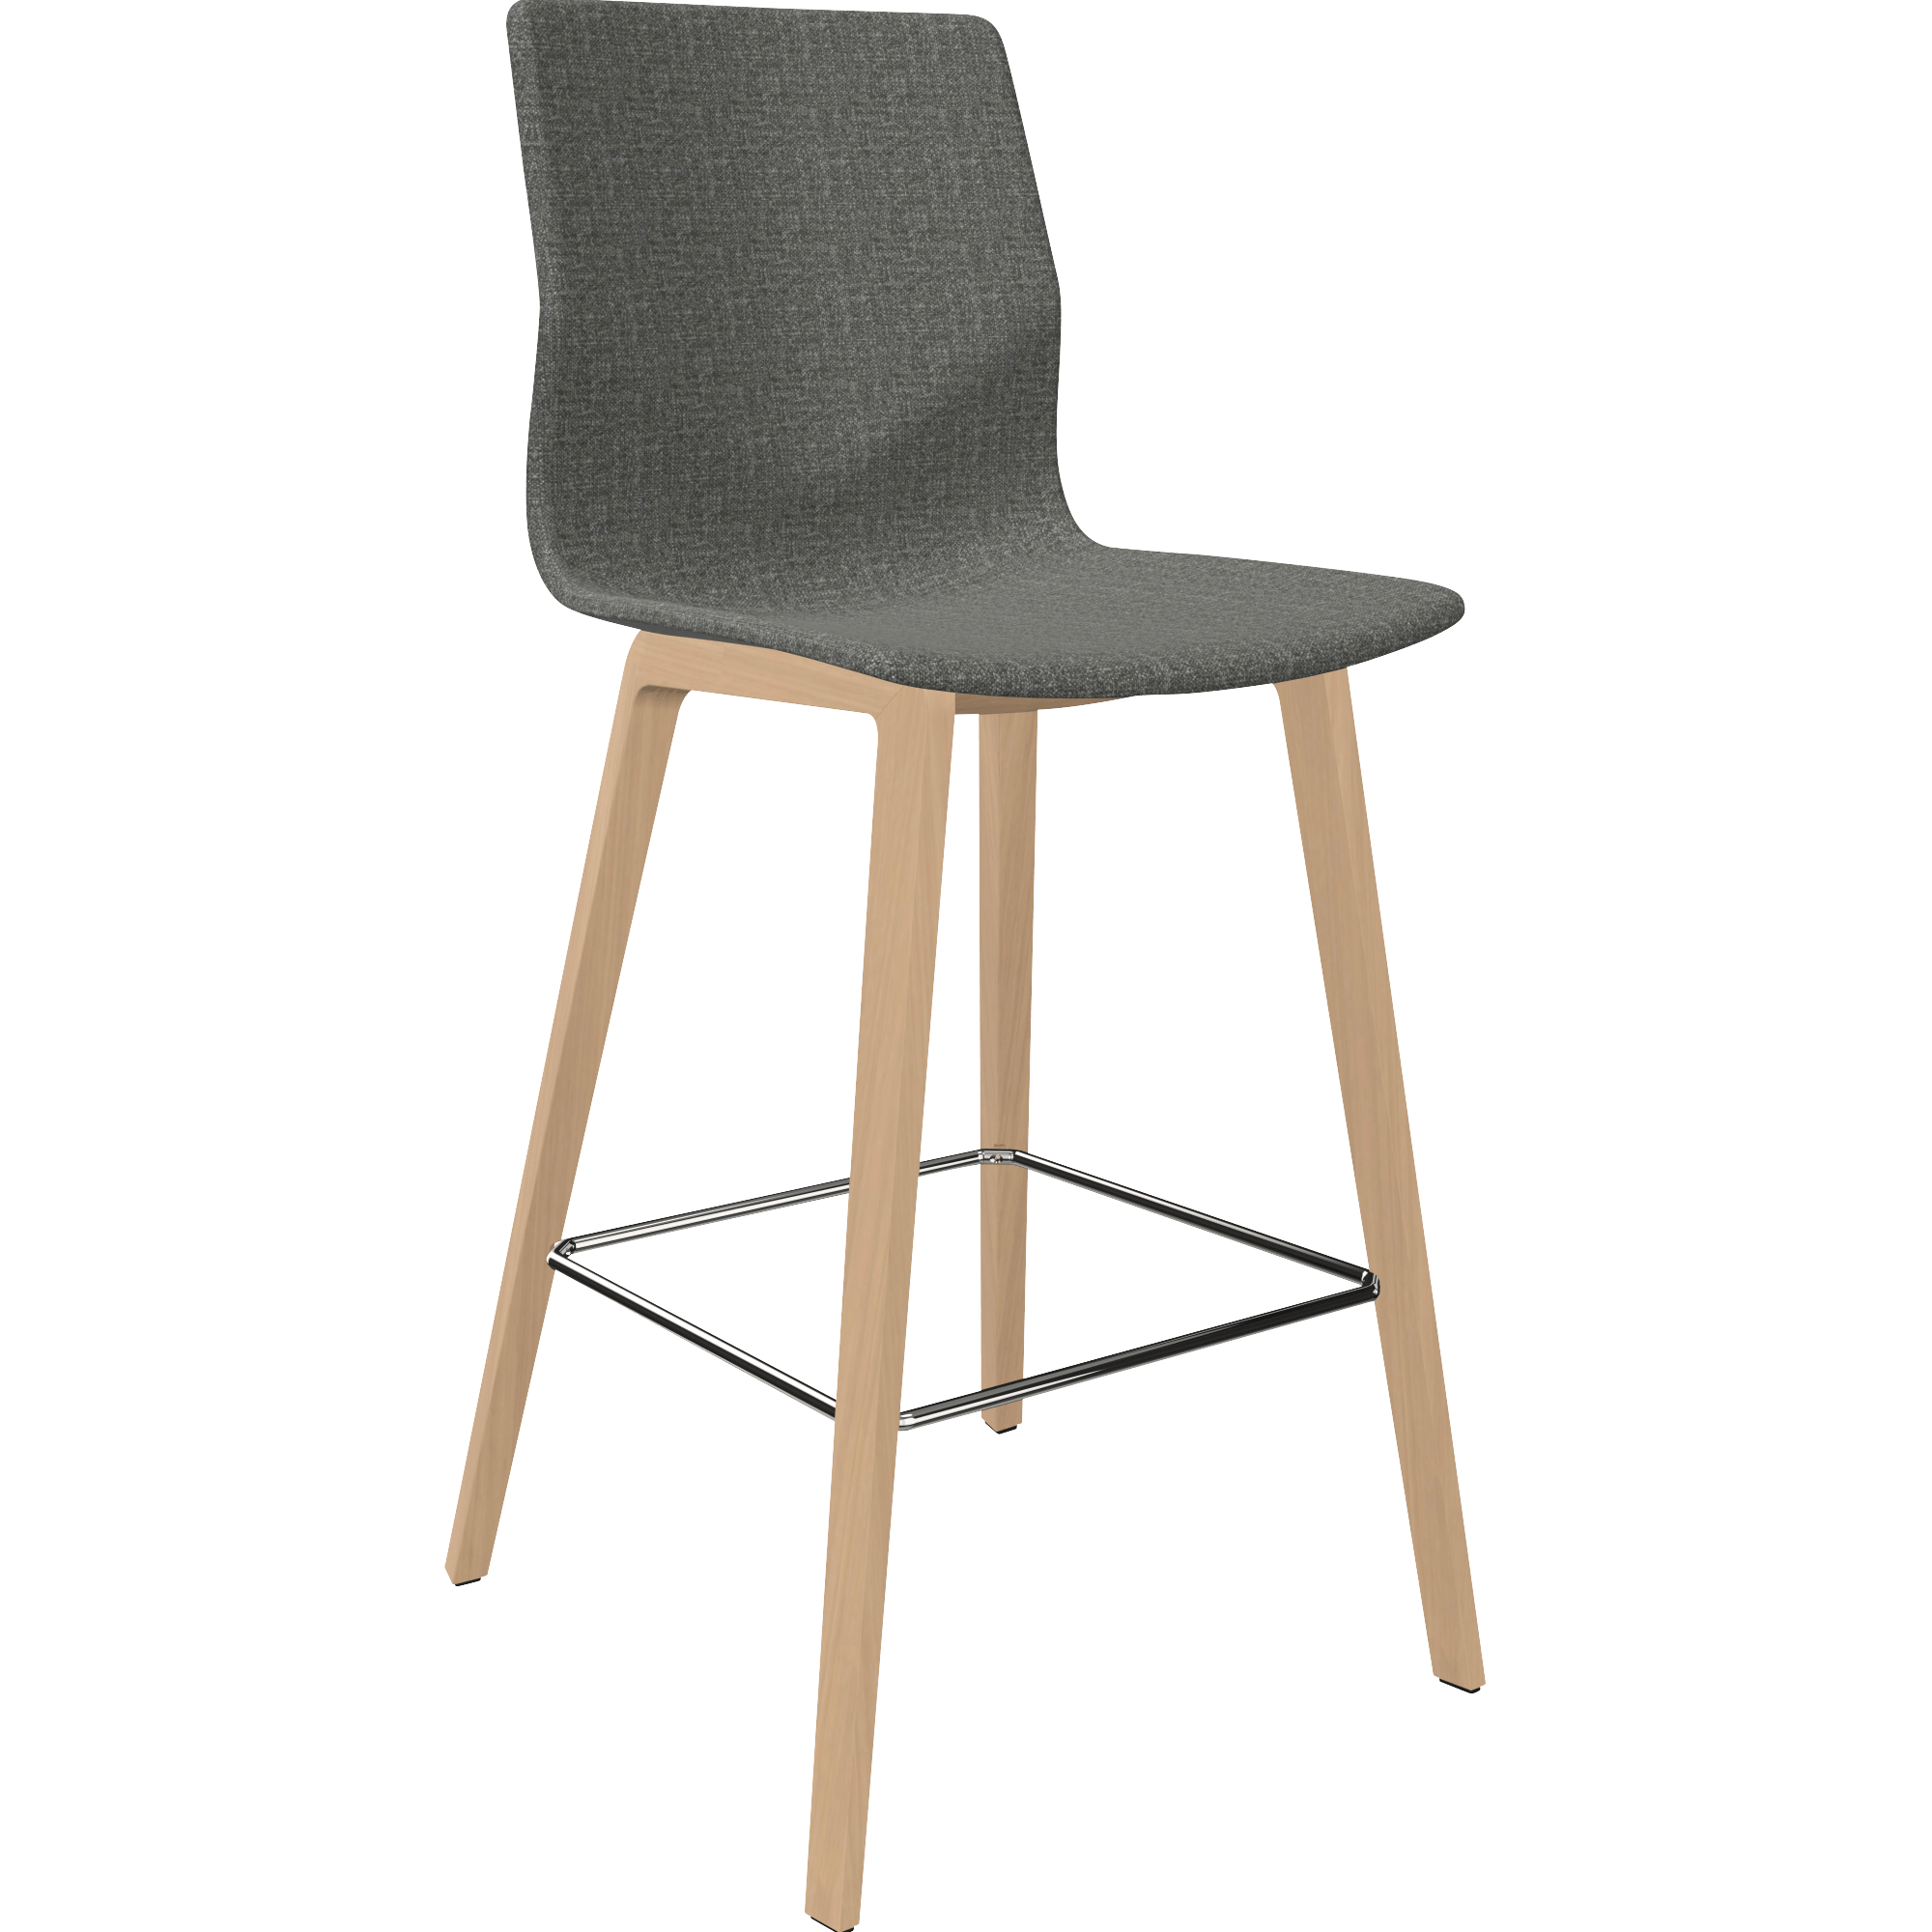 A grey counter chair with wooden legs.